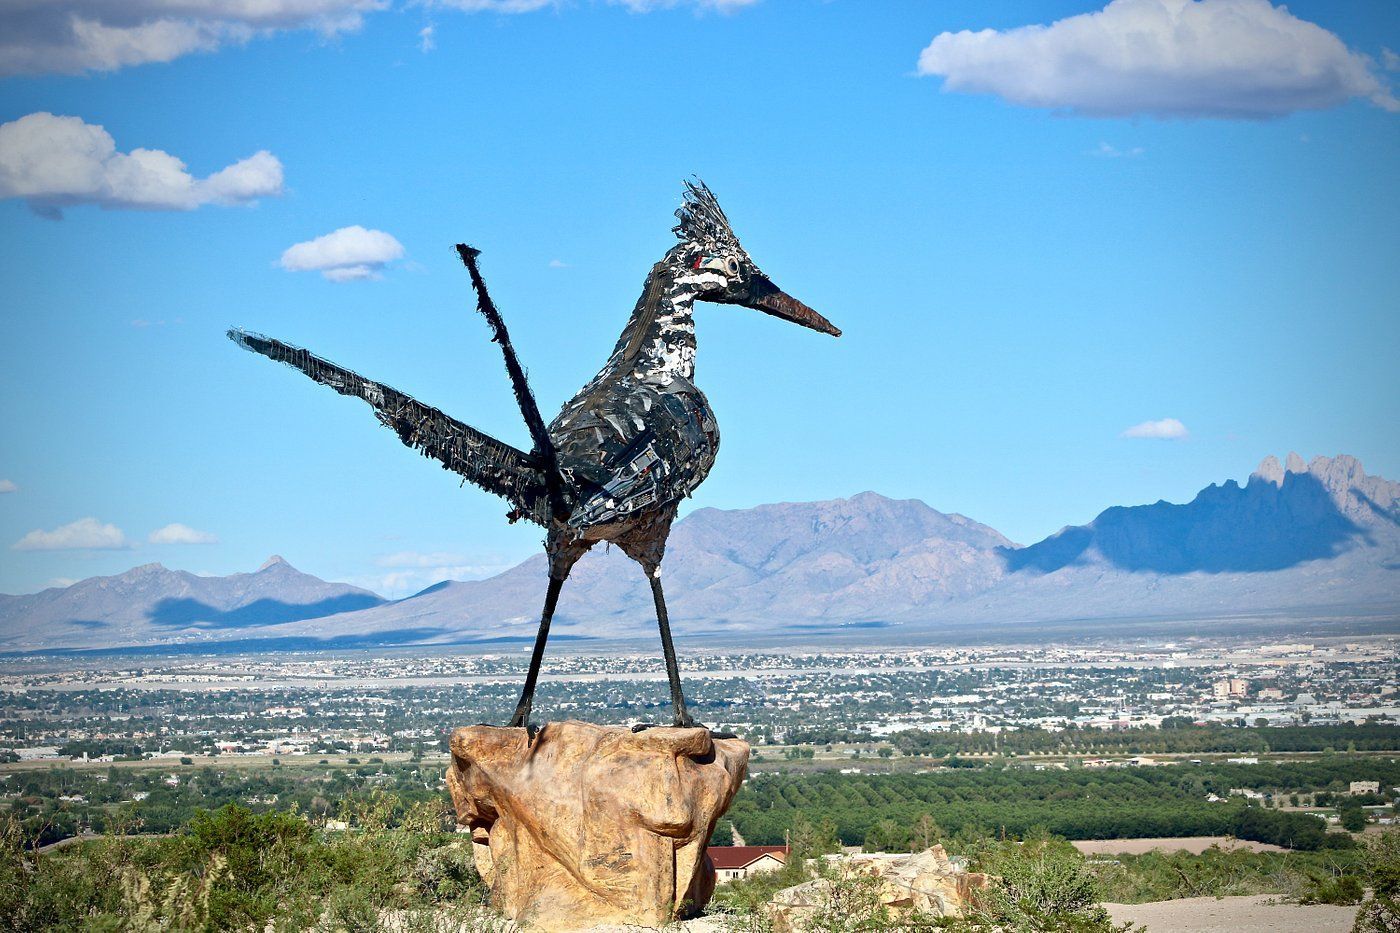 
World's Largest Recycled Roadrunner Sculpture, world record in Las Cruces, New Mexico